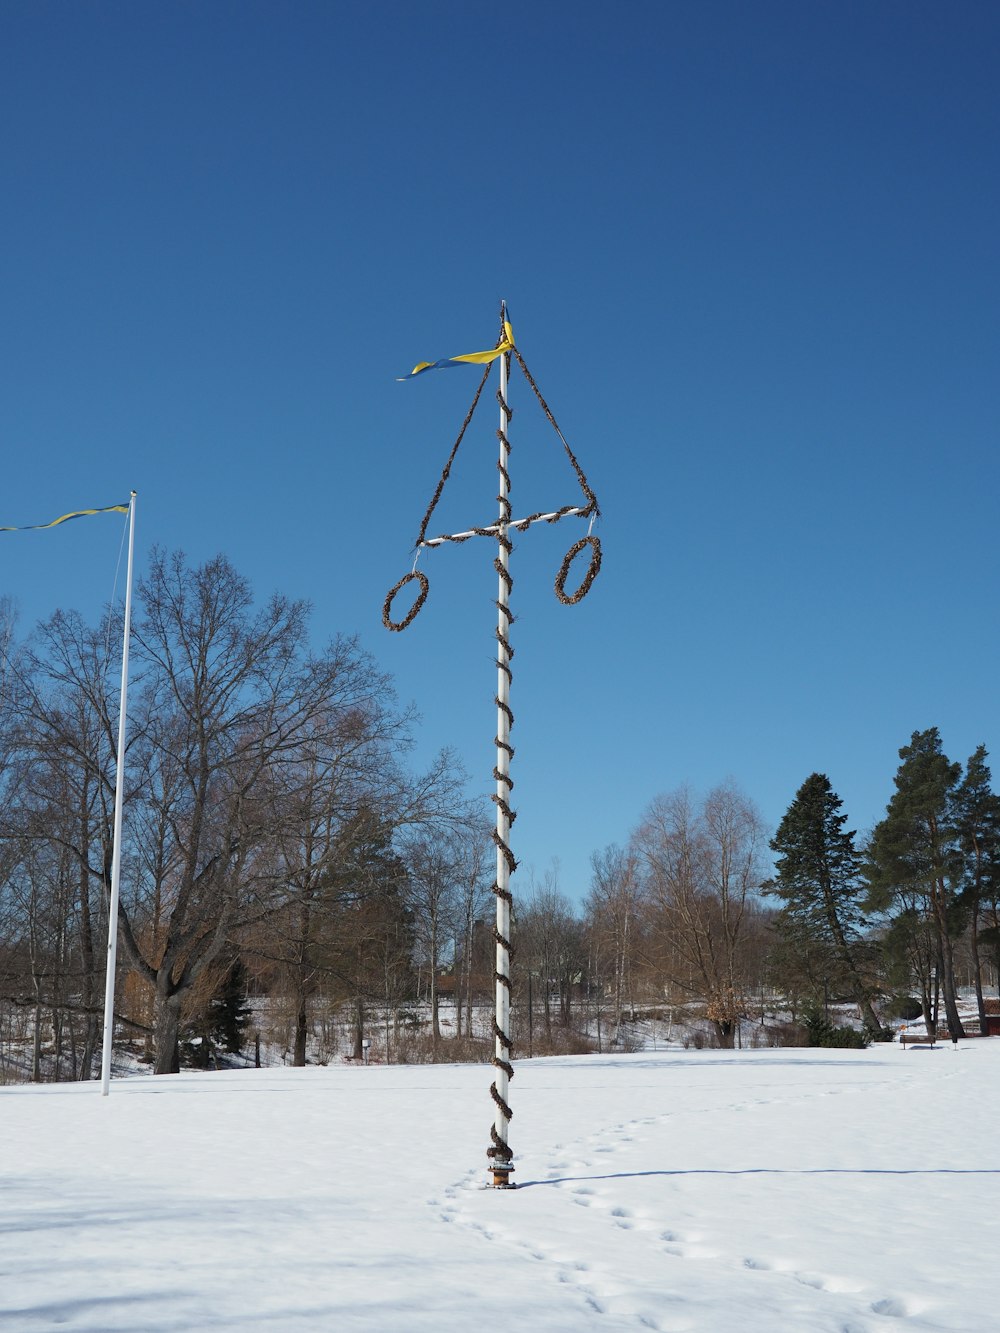 a pole with a flag on it in a snowy area